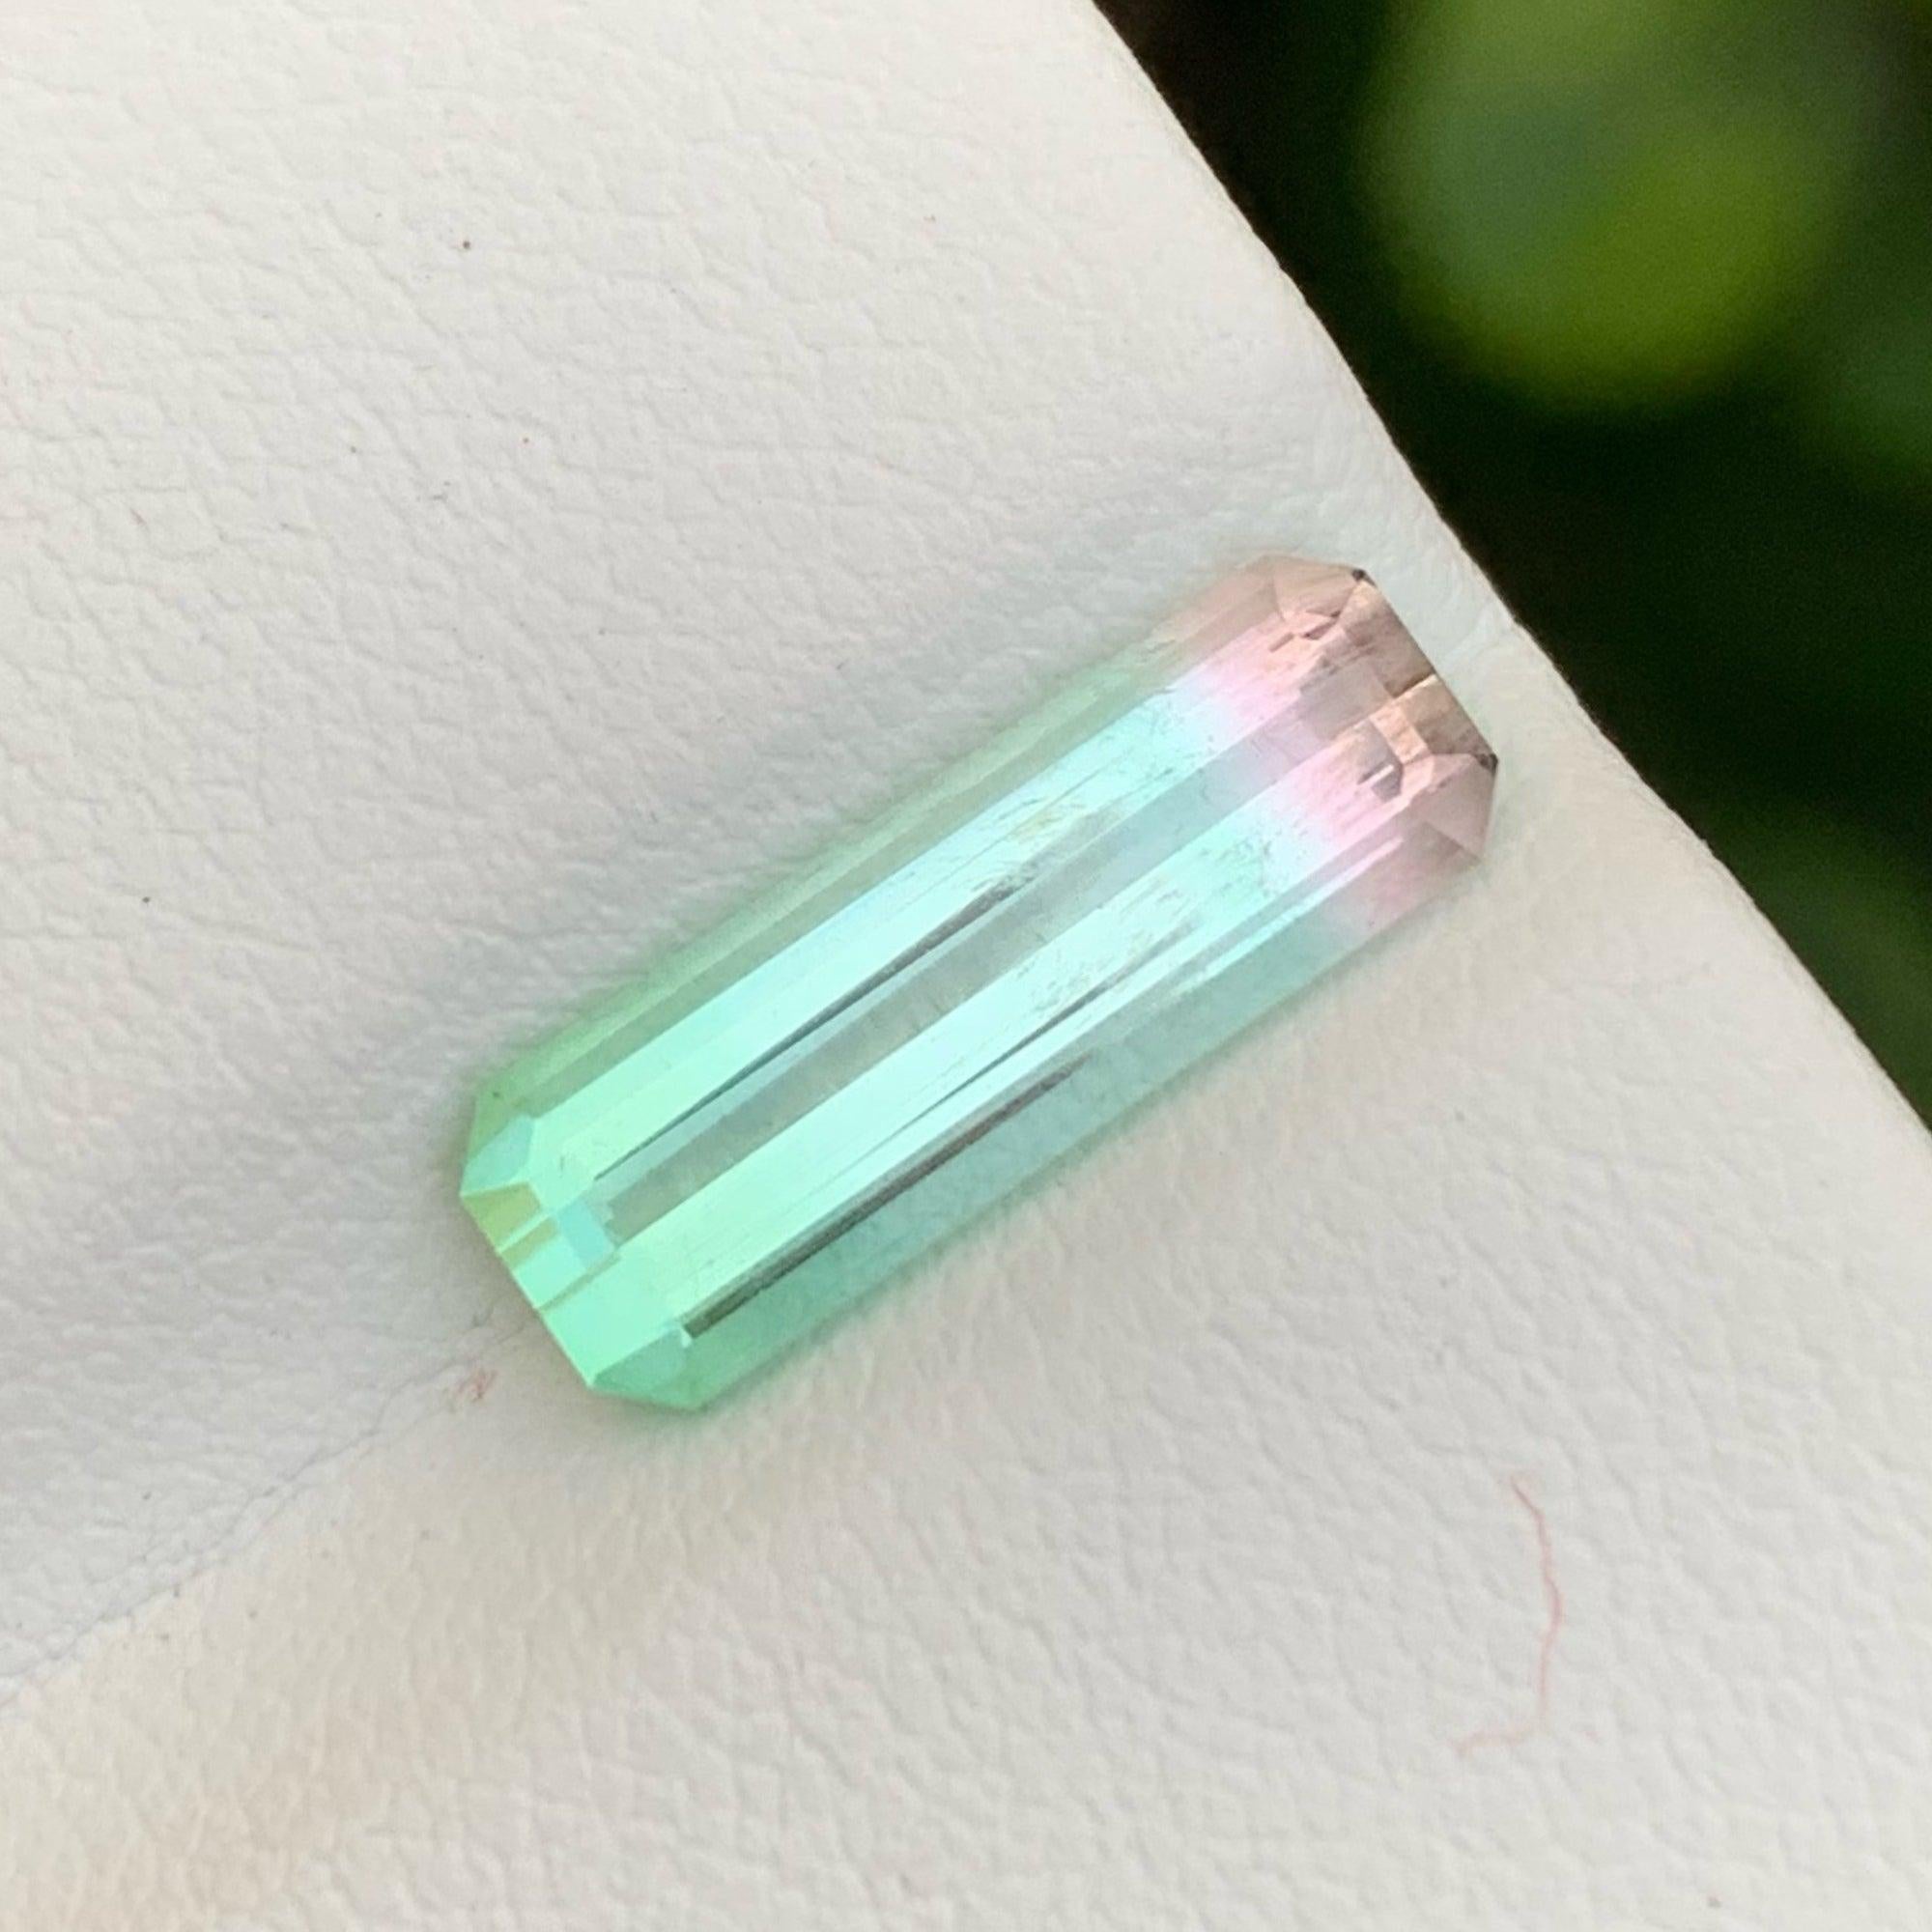 Emerald Cut Beautiful Bicolor Loose Tourmaline Gemstone 3.25 CTS Tourmaline From Afghanistan For Sale